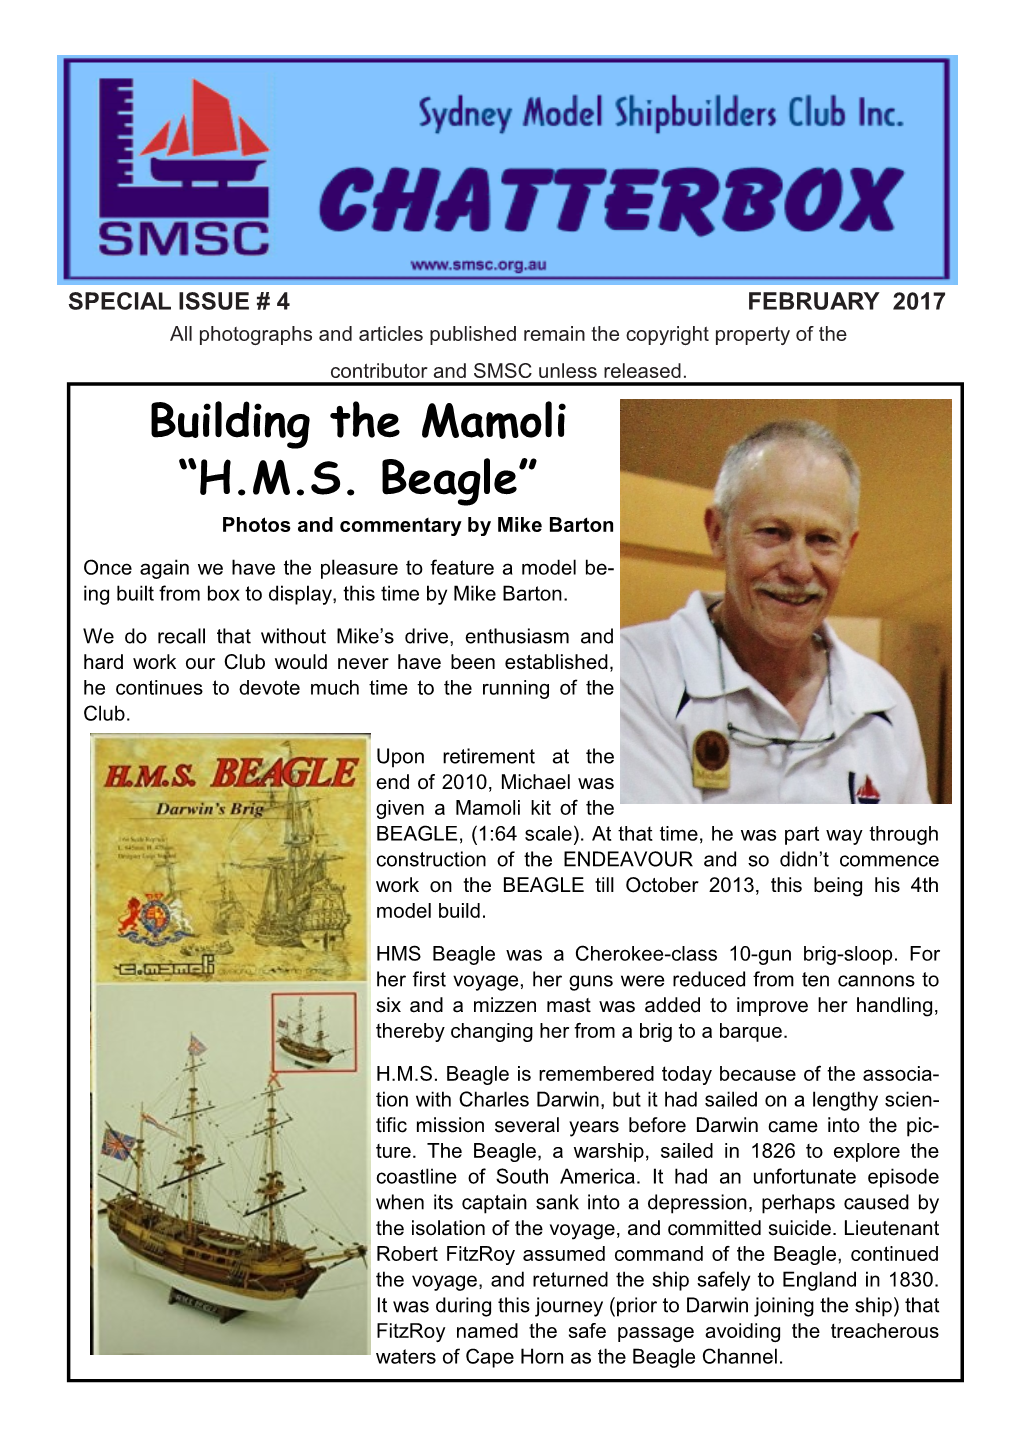 Building the Mamoli “H.M.S. Beagle” Photos and Commentary by Mike Barton